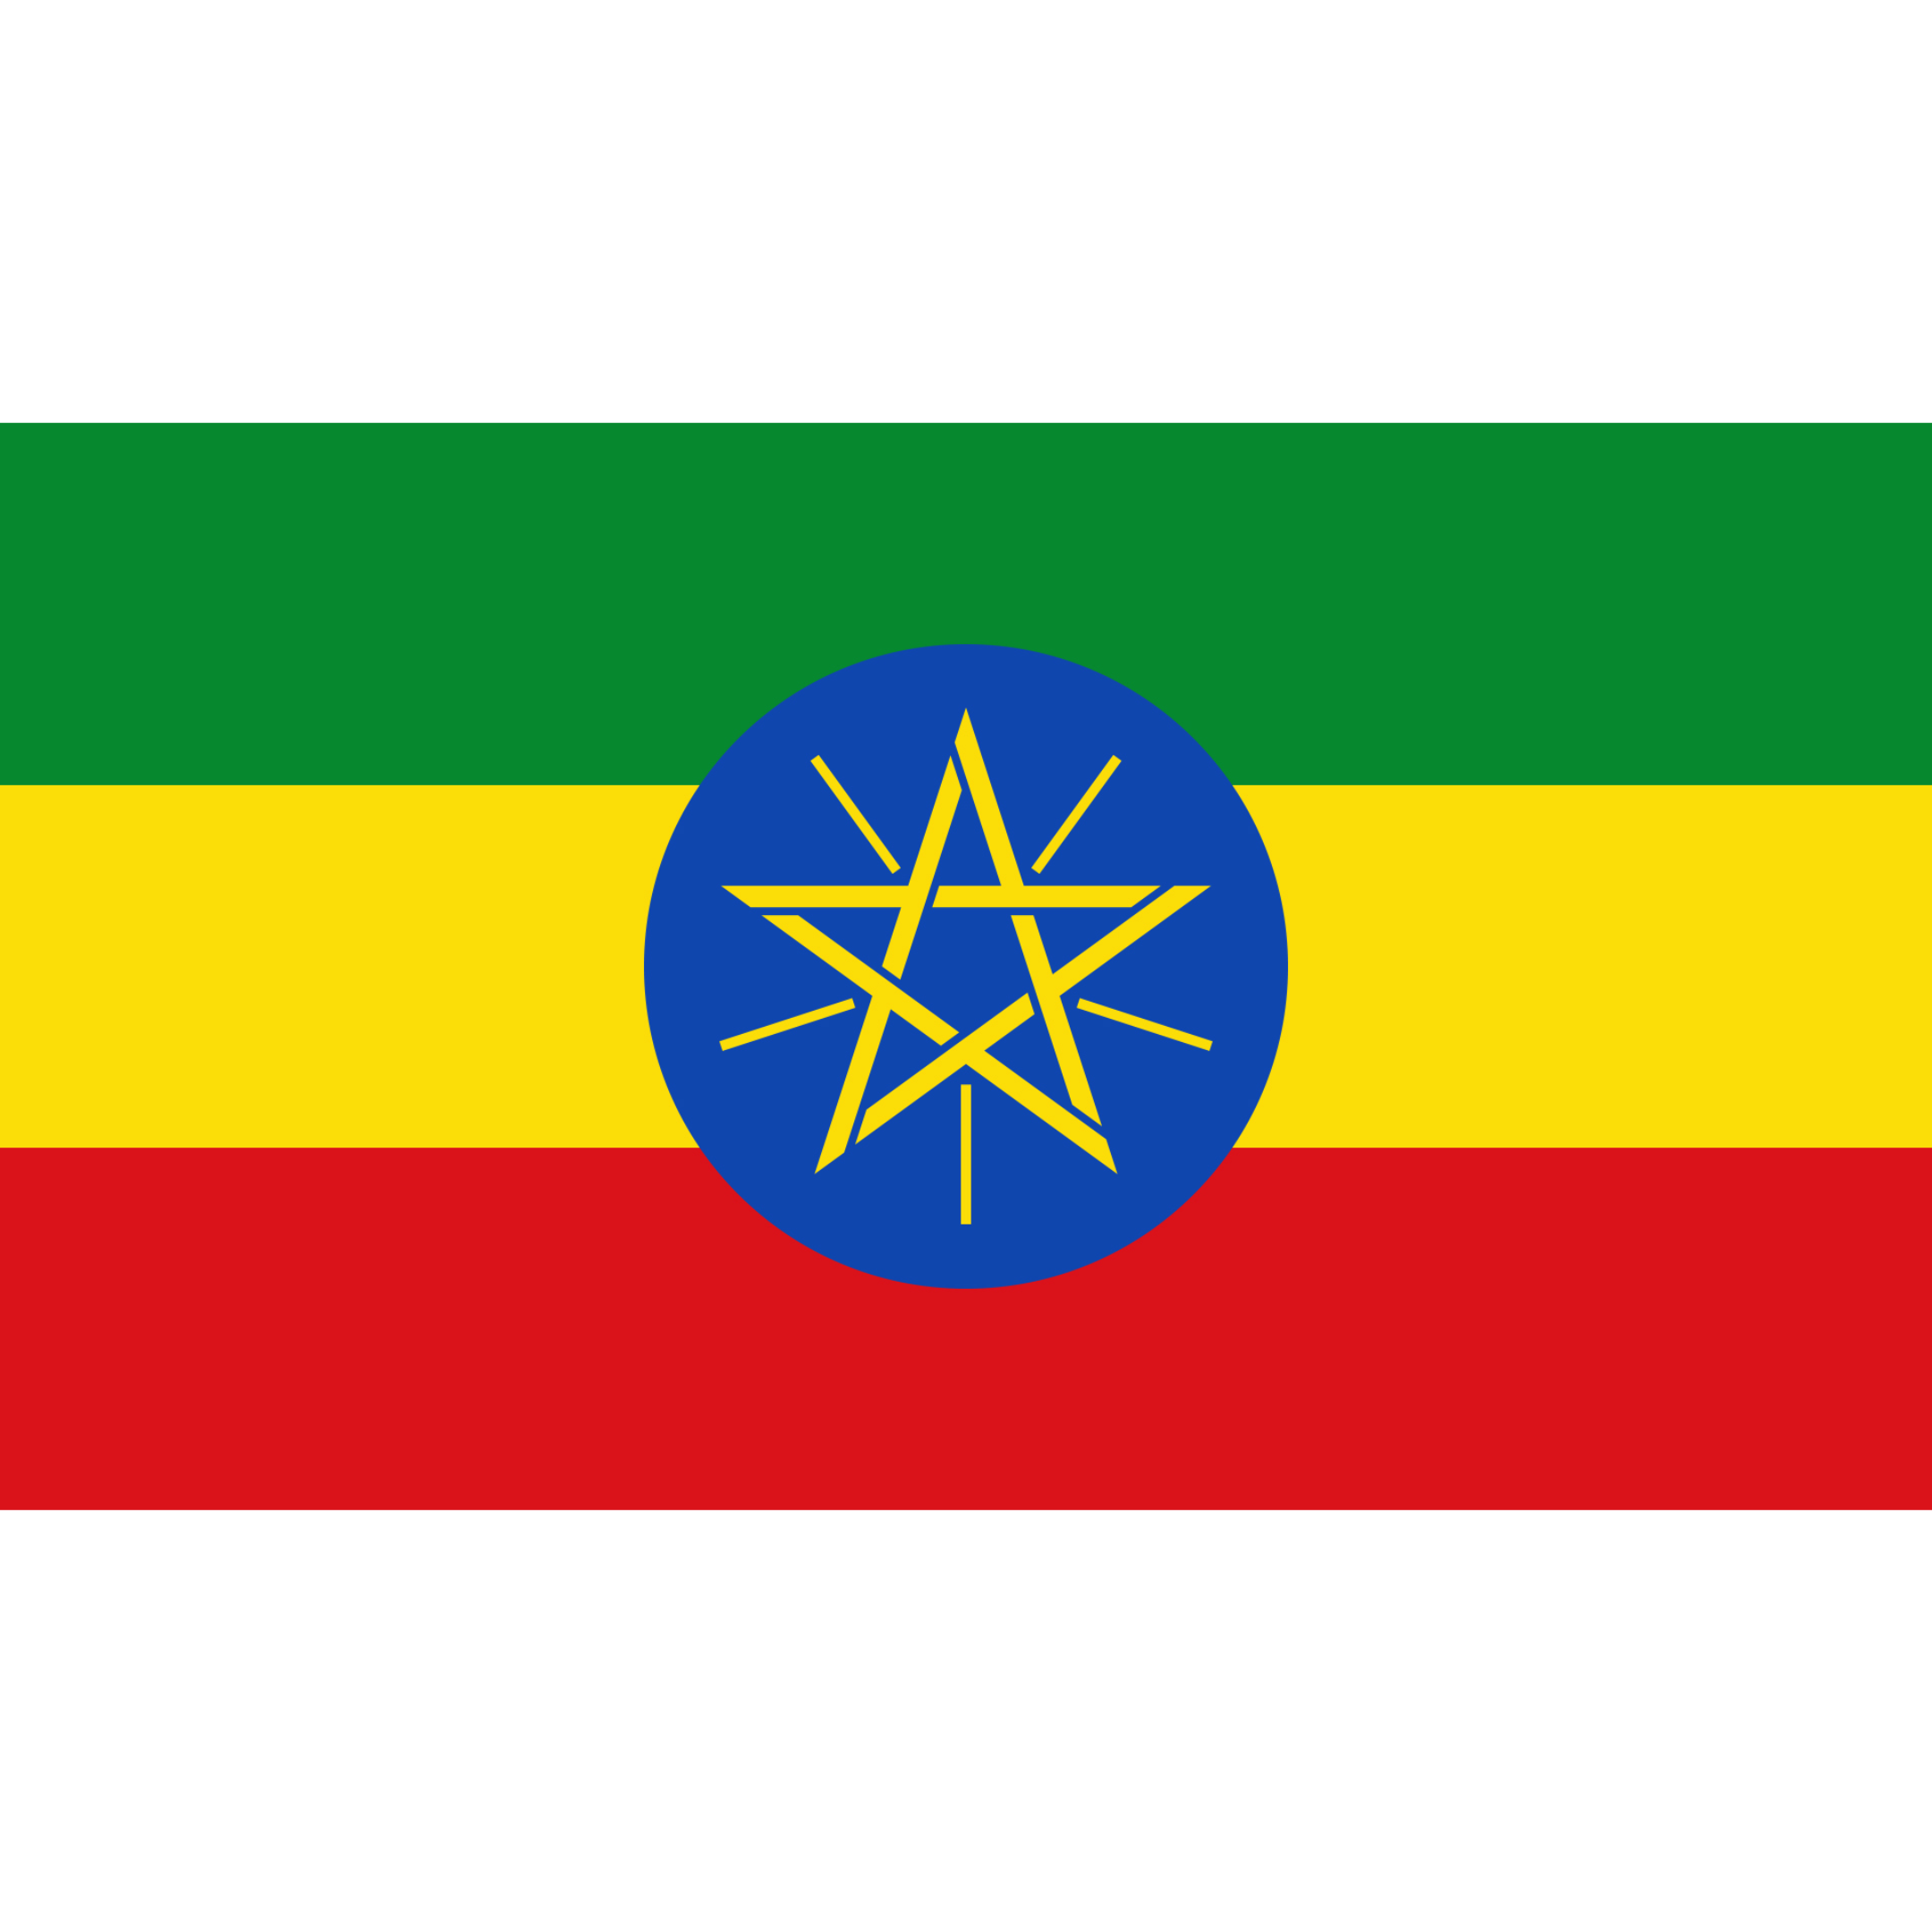 Ethiopia's flag has 3 green, yellow and red horizontal bands with a golden pentagram on a blue circle in the centre.